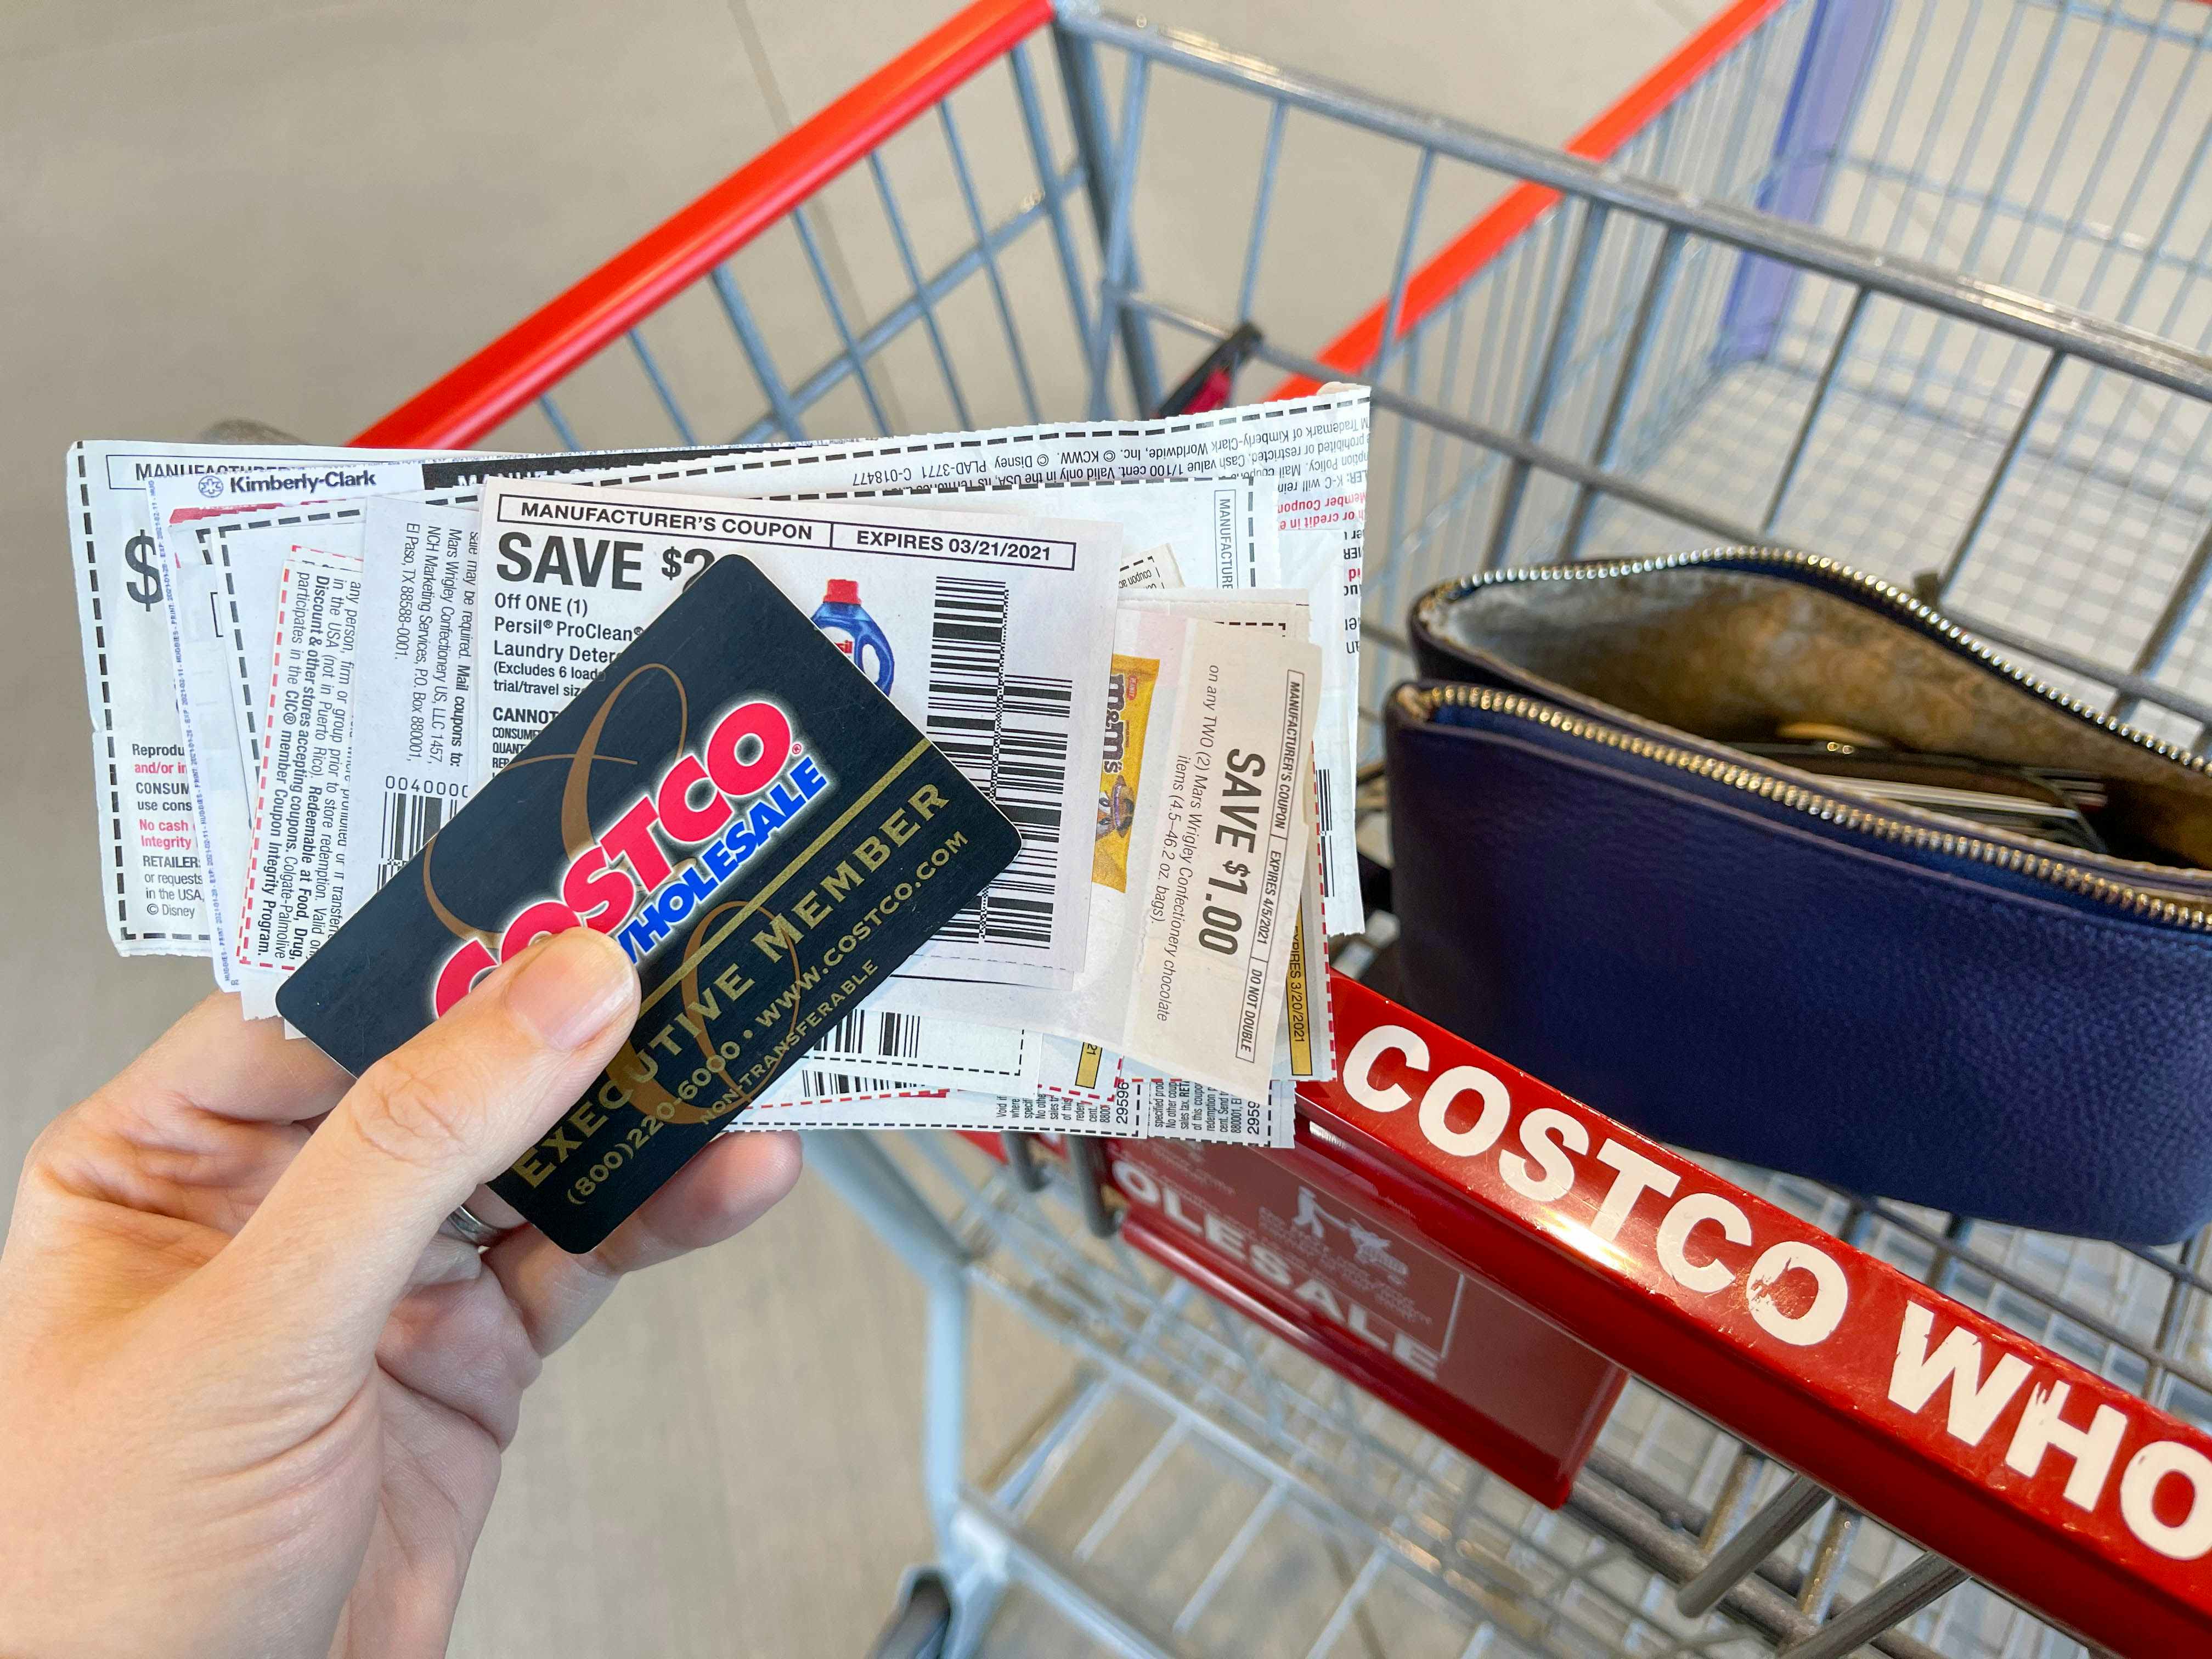 Costco: $25 iTunes eGift Card Only $21.49 + More